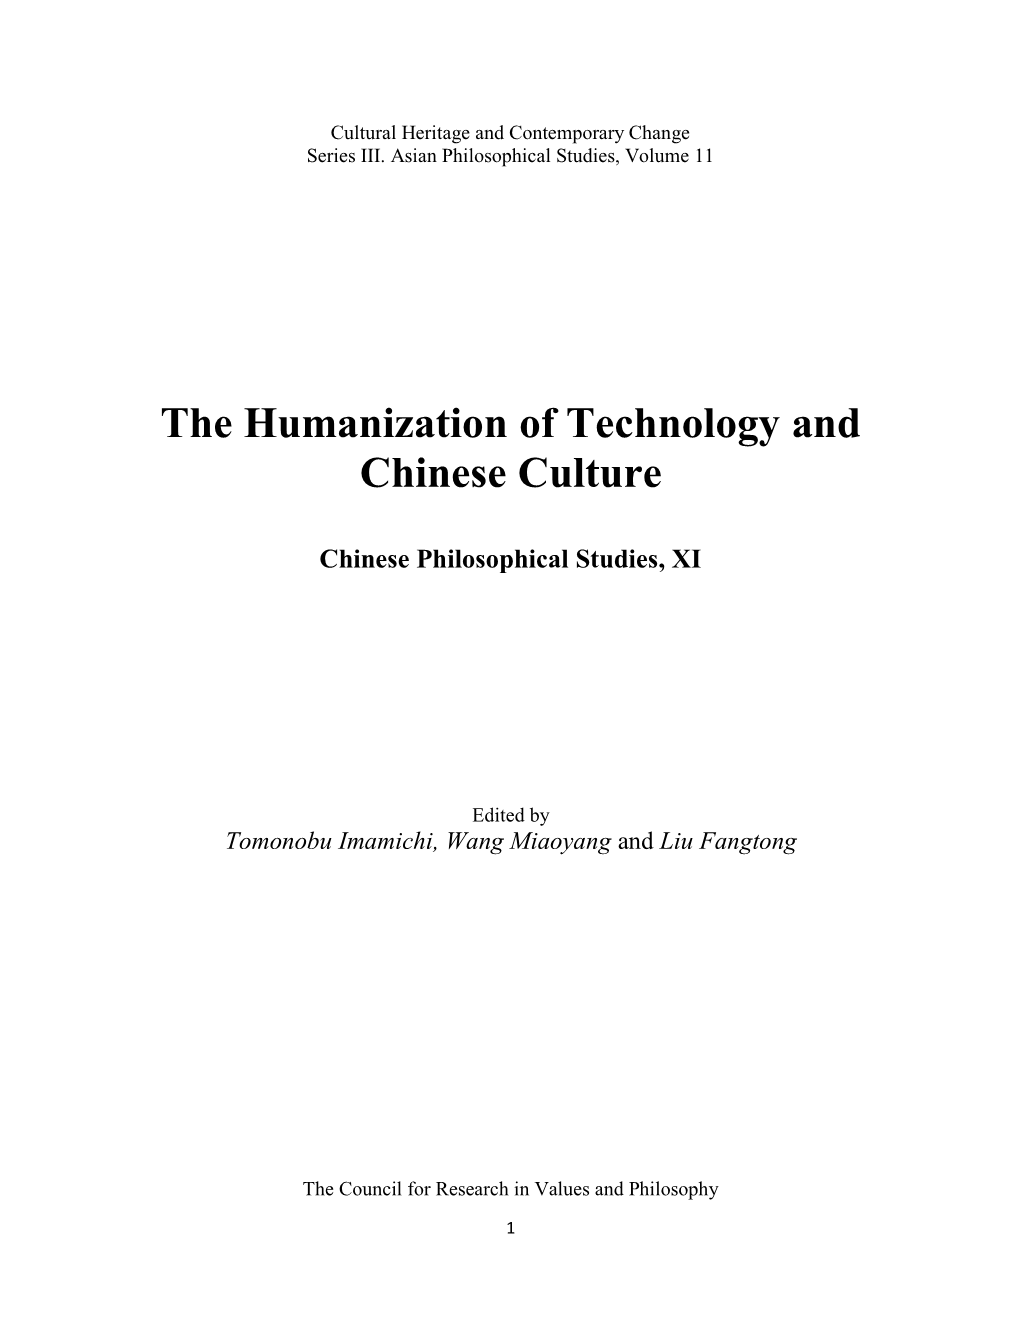 The Humanization of Technology and Chinese Culture